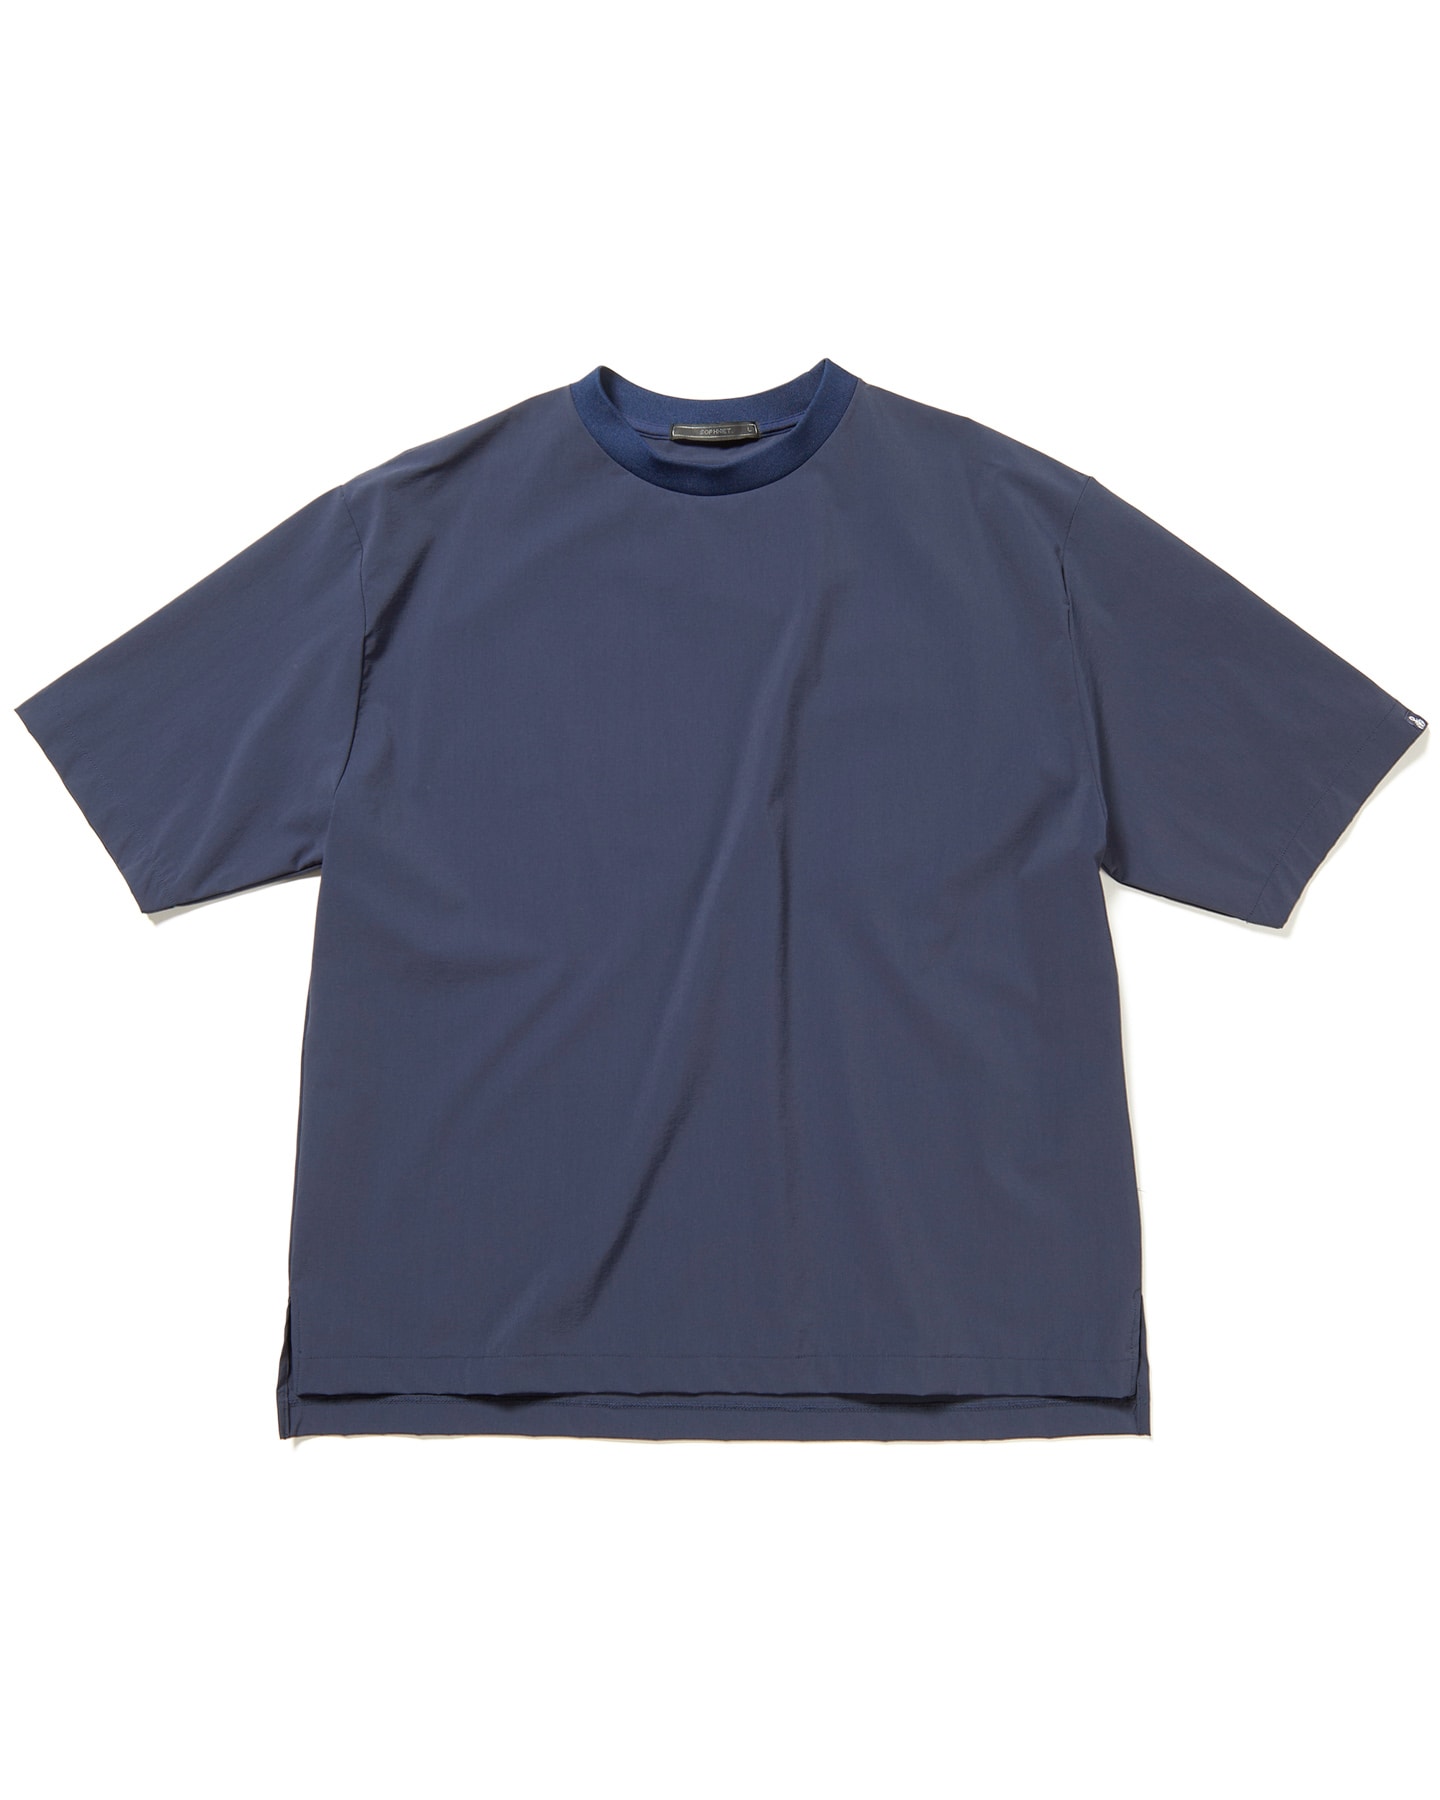 SOPH. | 4WAY STRETCH OVERSIZED S/S TOP(M NAVY):